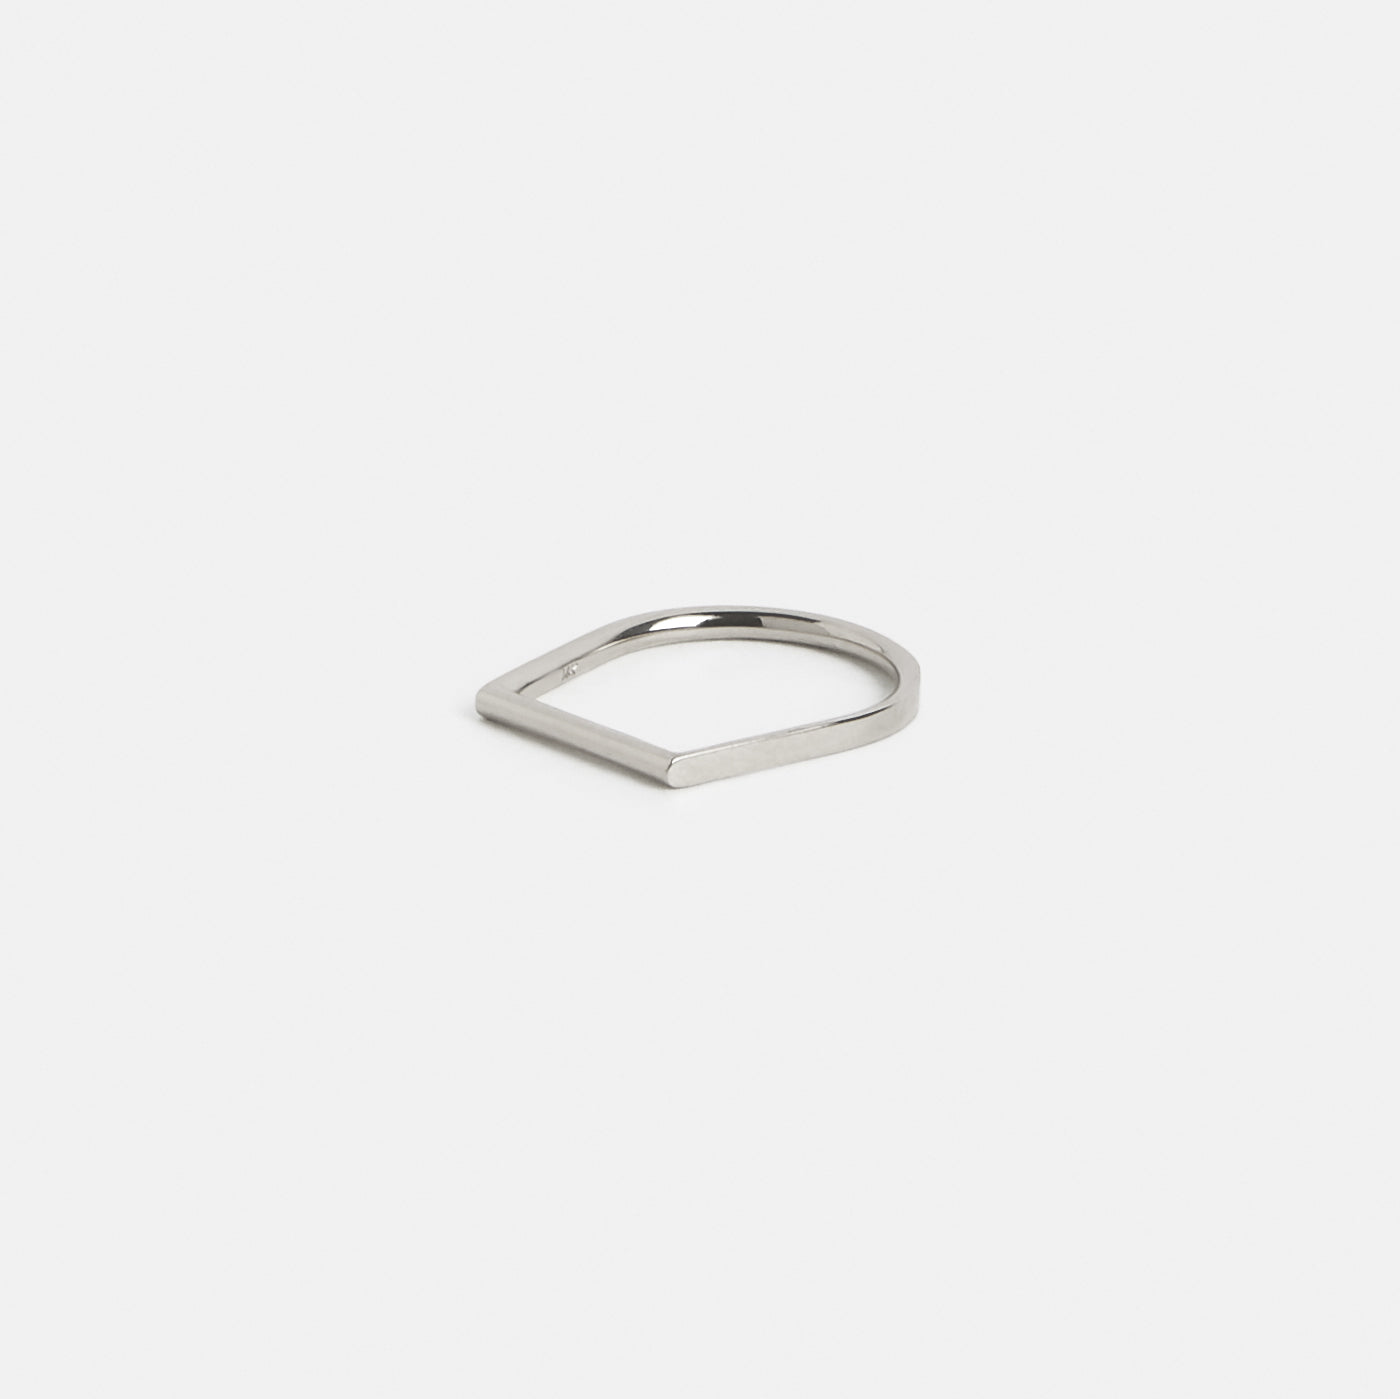 Lina Designer Ring in 14k White Gold By SHW Fine Jewelry New York City